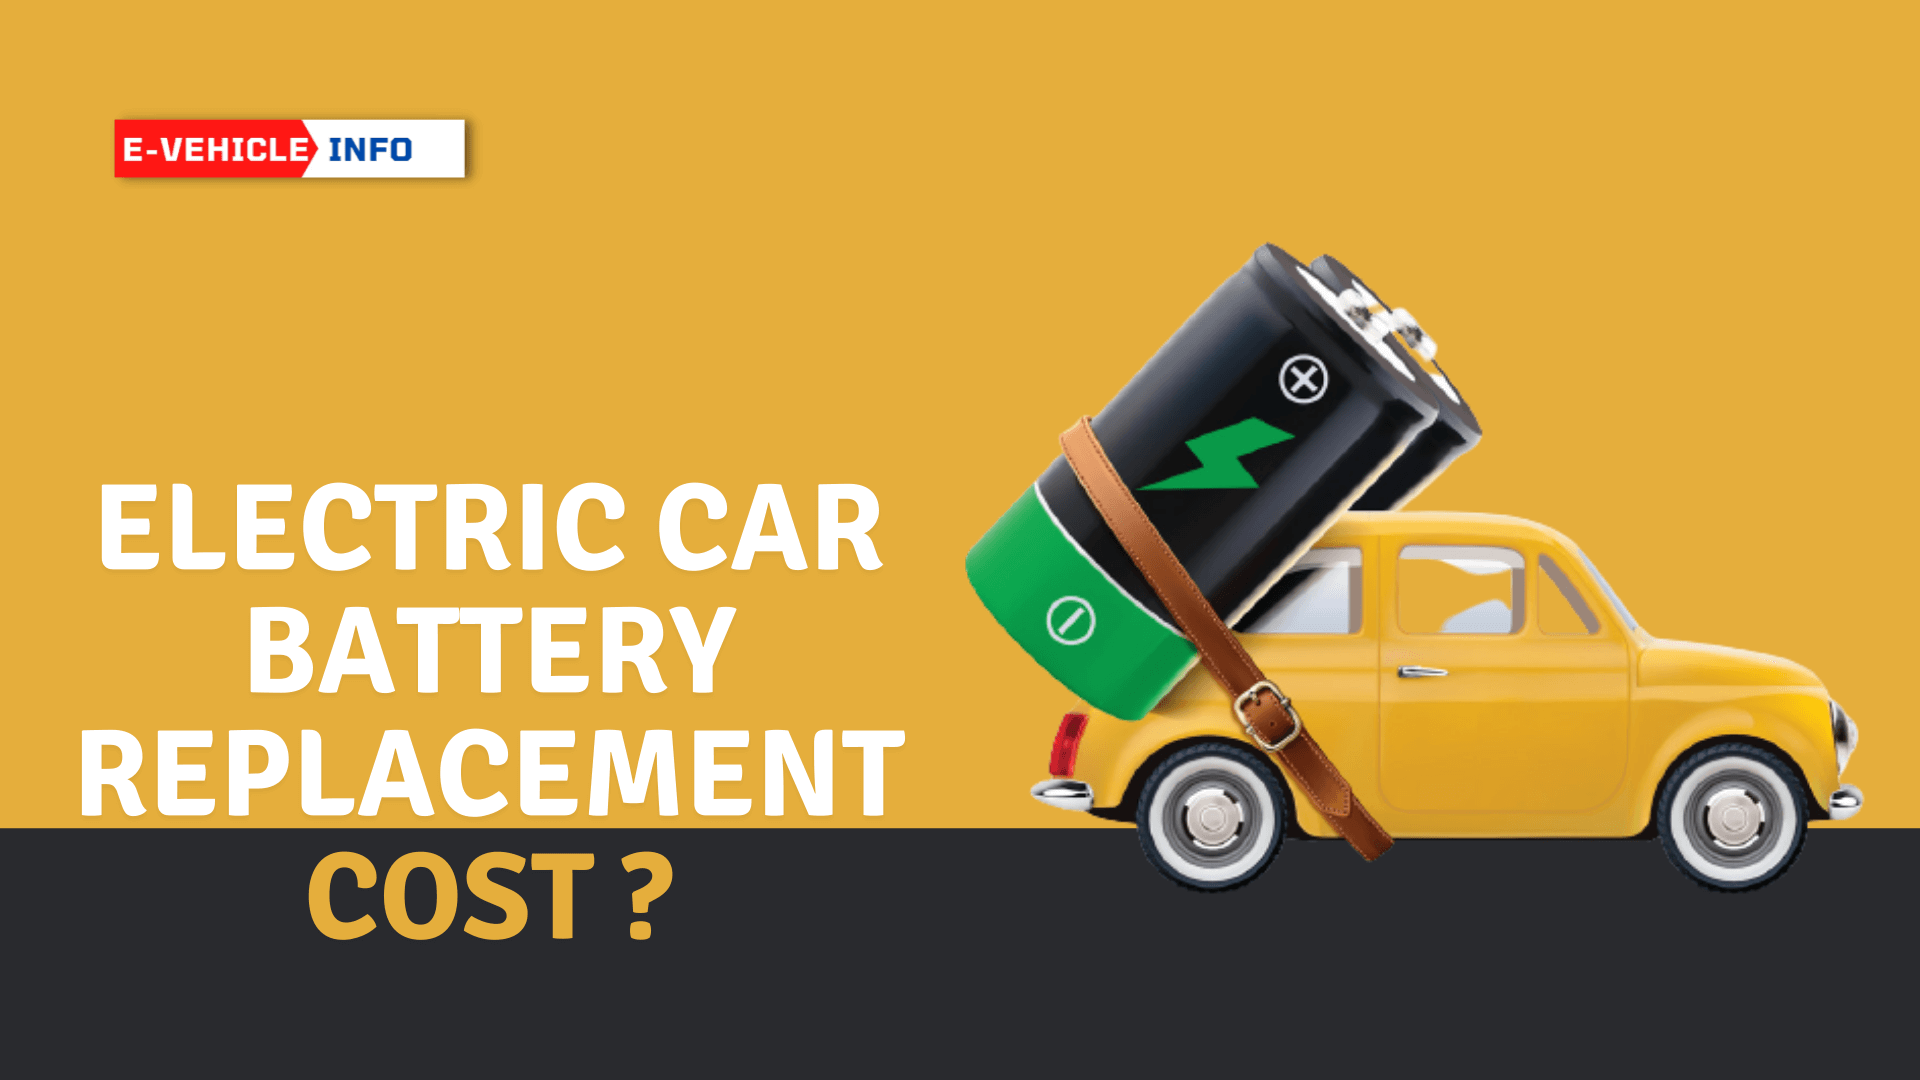 https://e-vehicleinfo.com/electric-car-battery-replacement-cost/